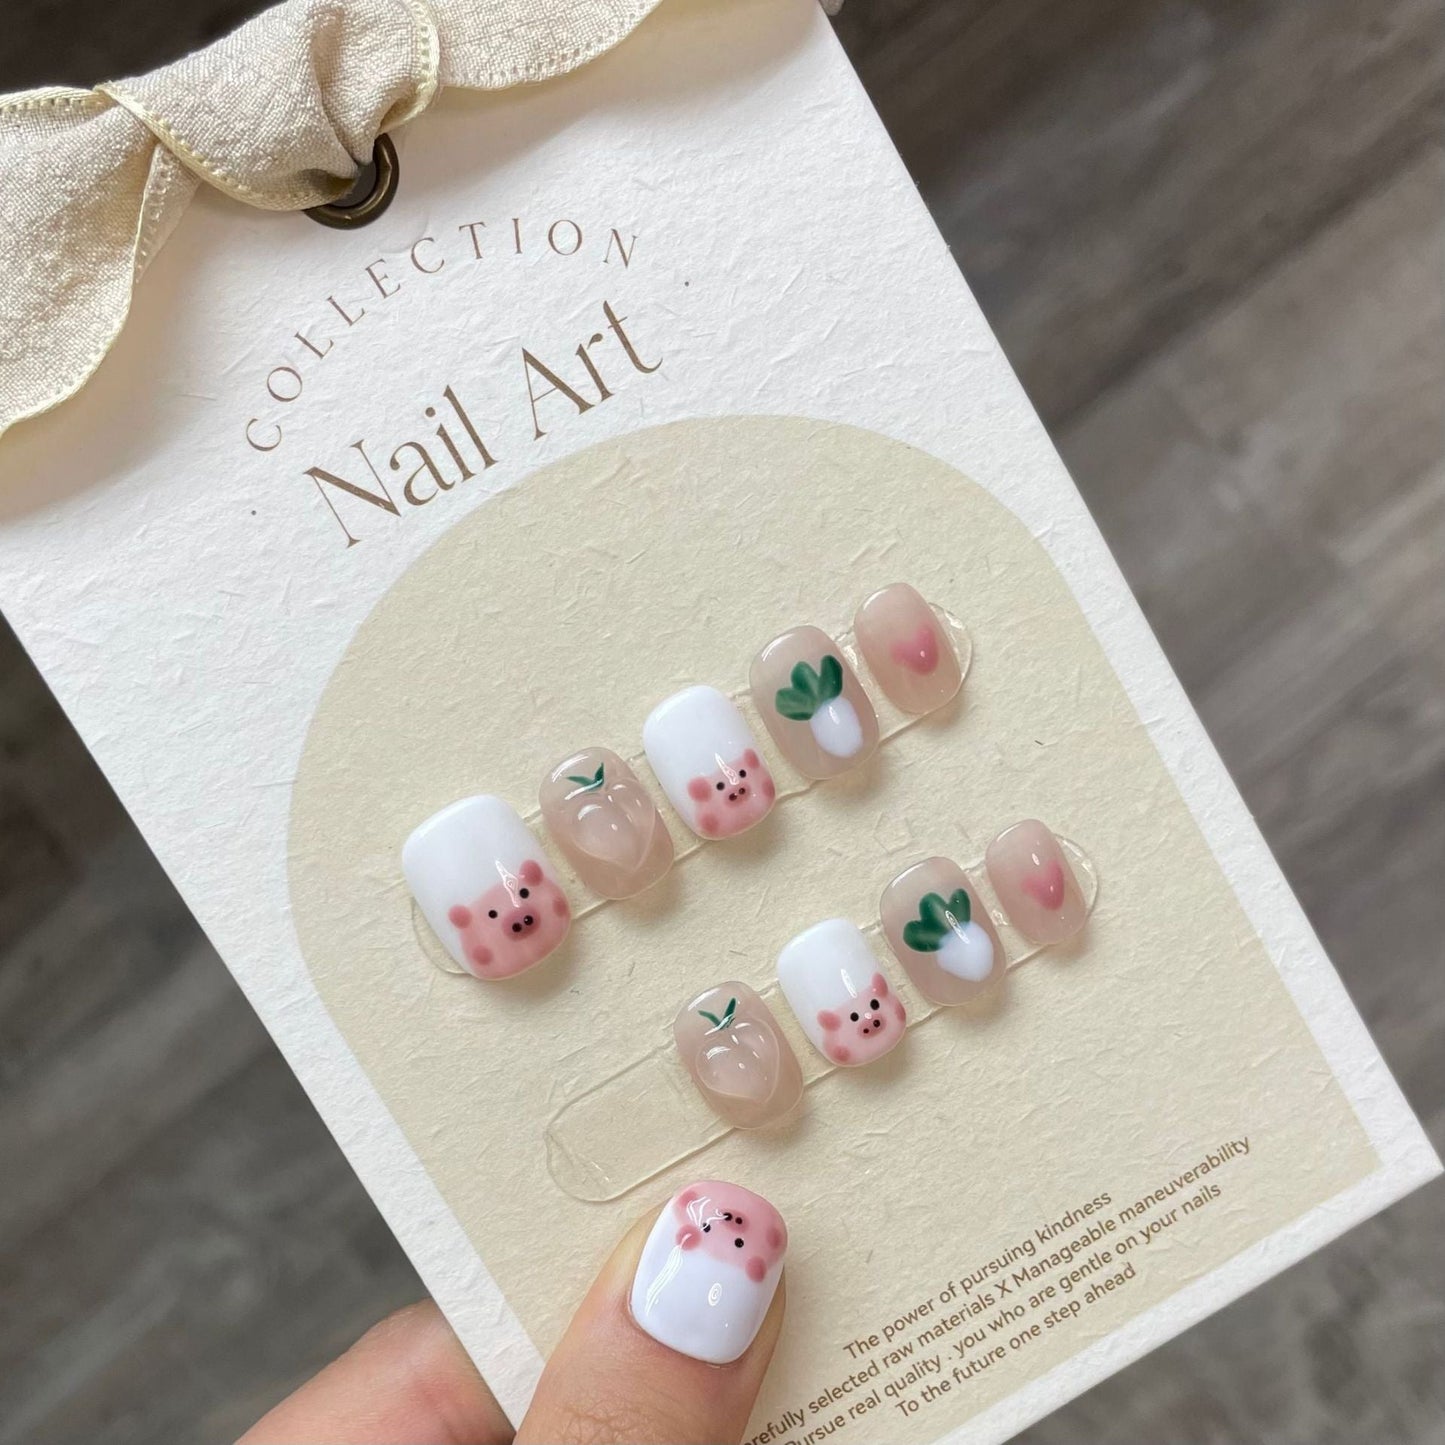 828 Handdrawn Piglet style press on nails 100% handmade false nails white nude color